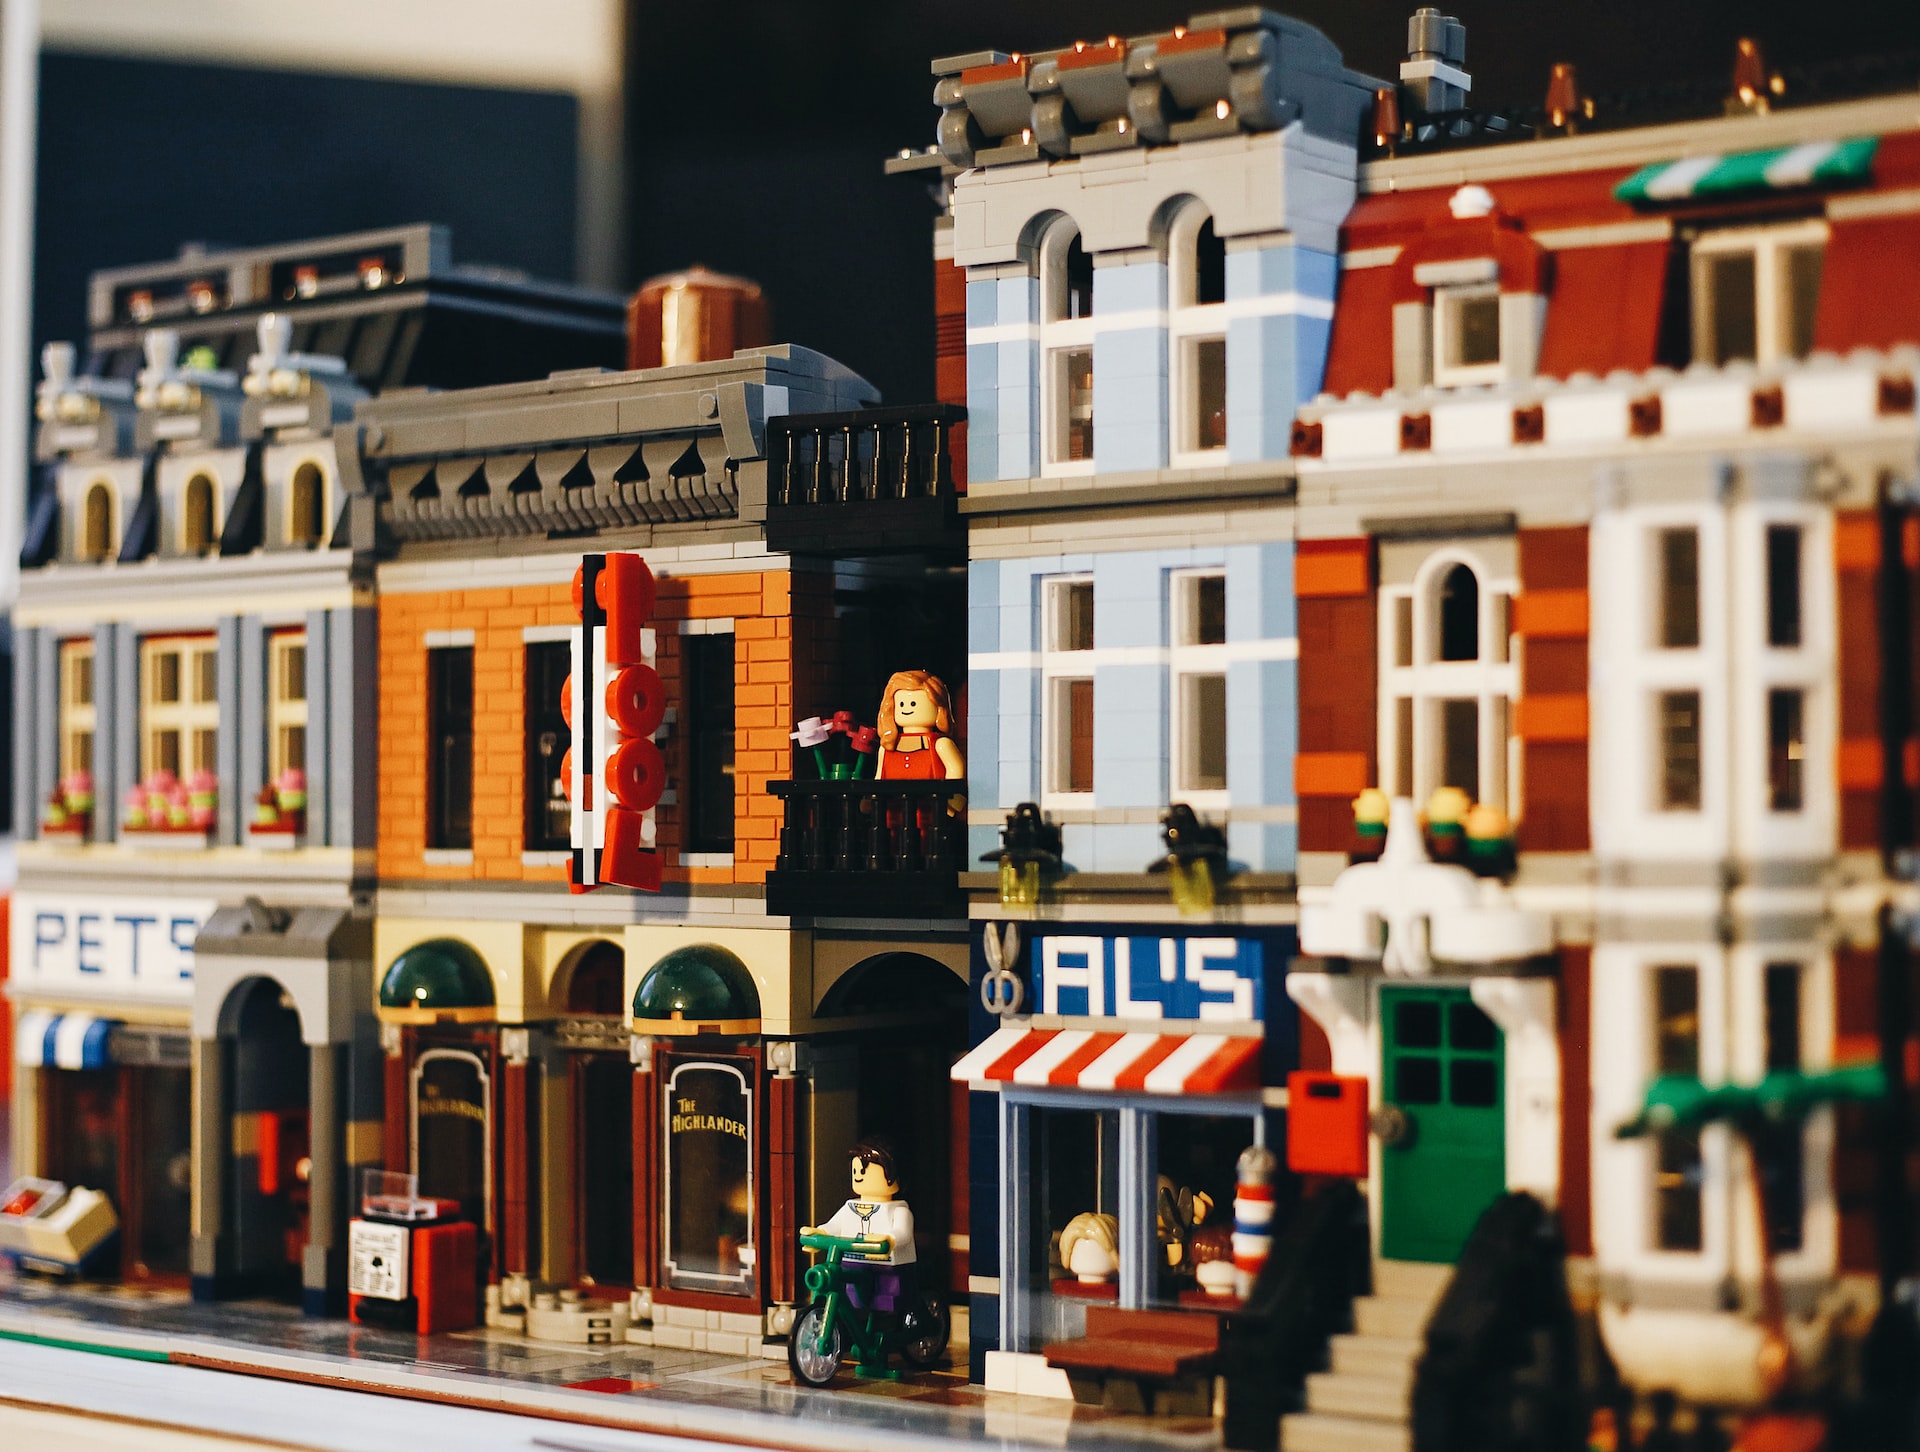 LEGO modular buildings, with a ‘Pets’ store and an ‘Al’s’ barbershop